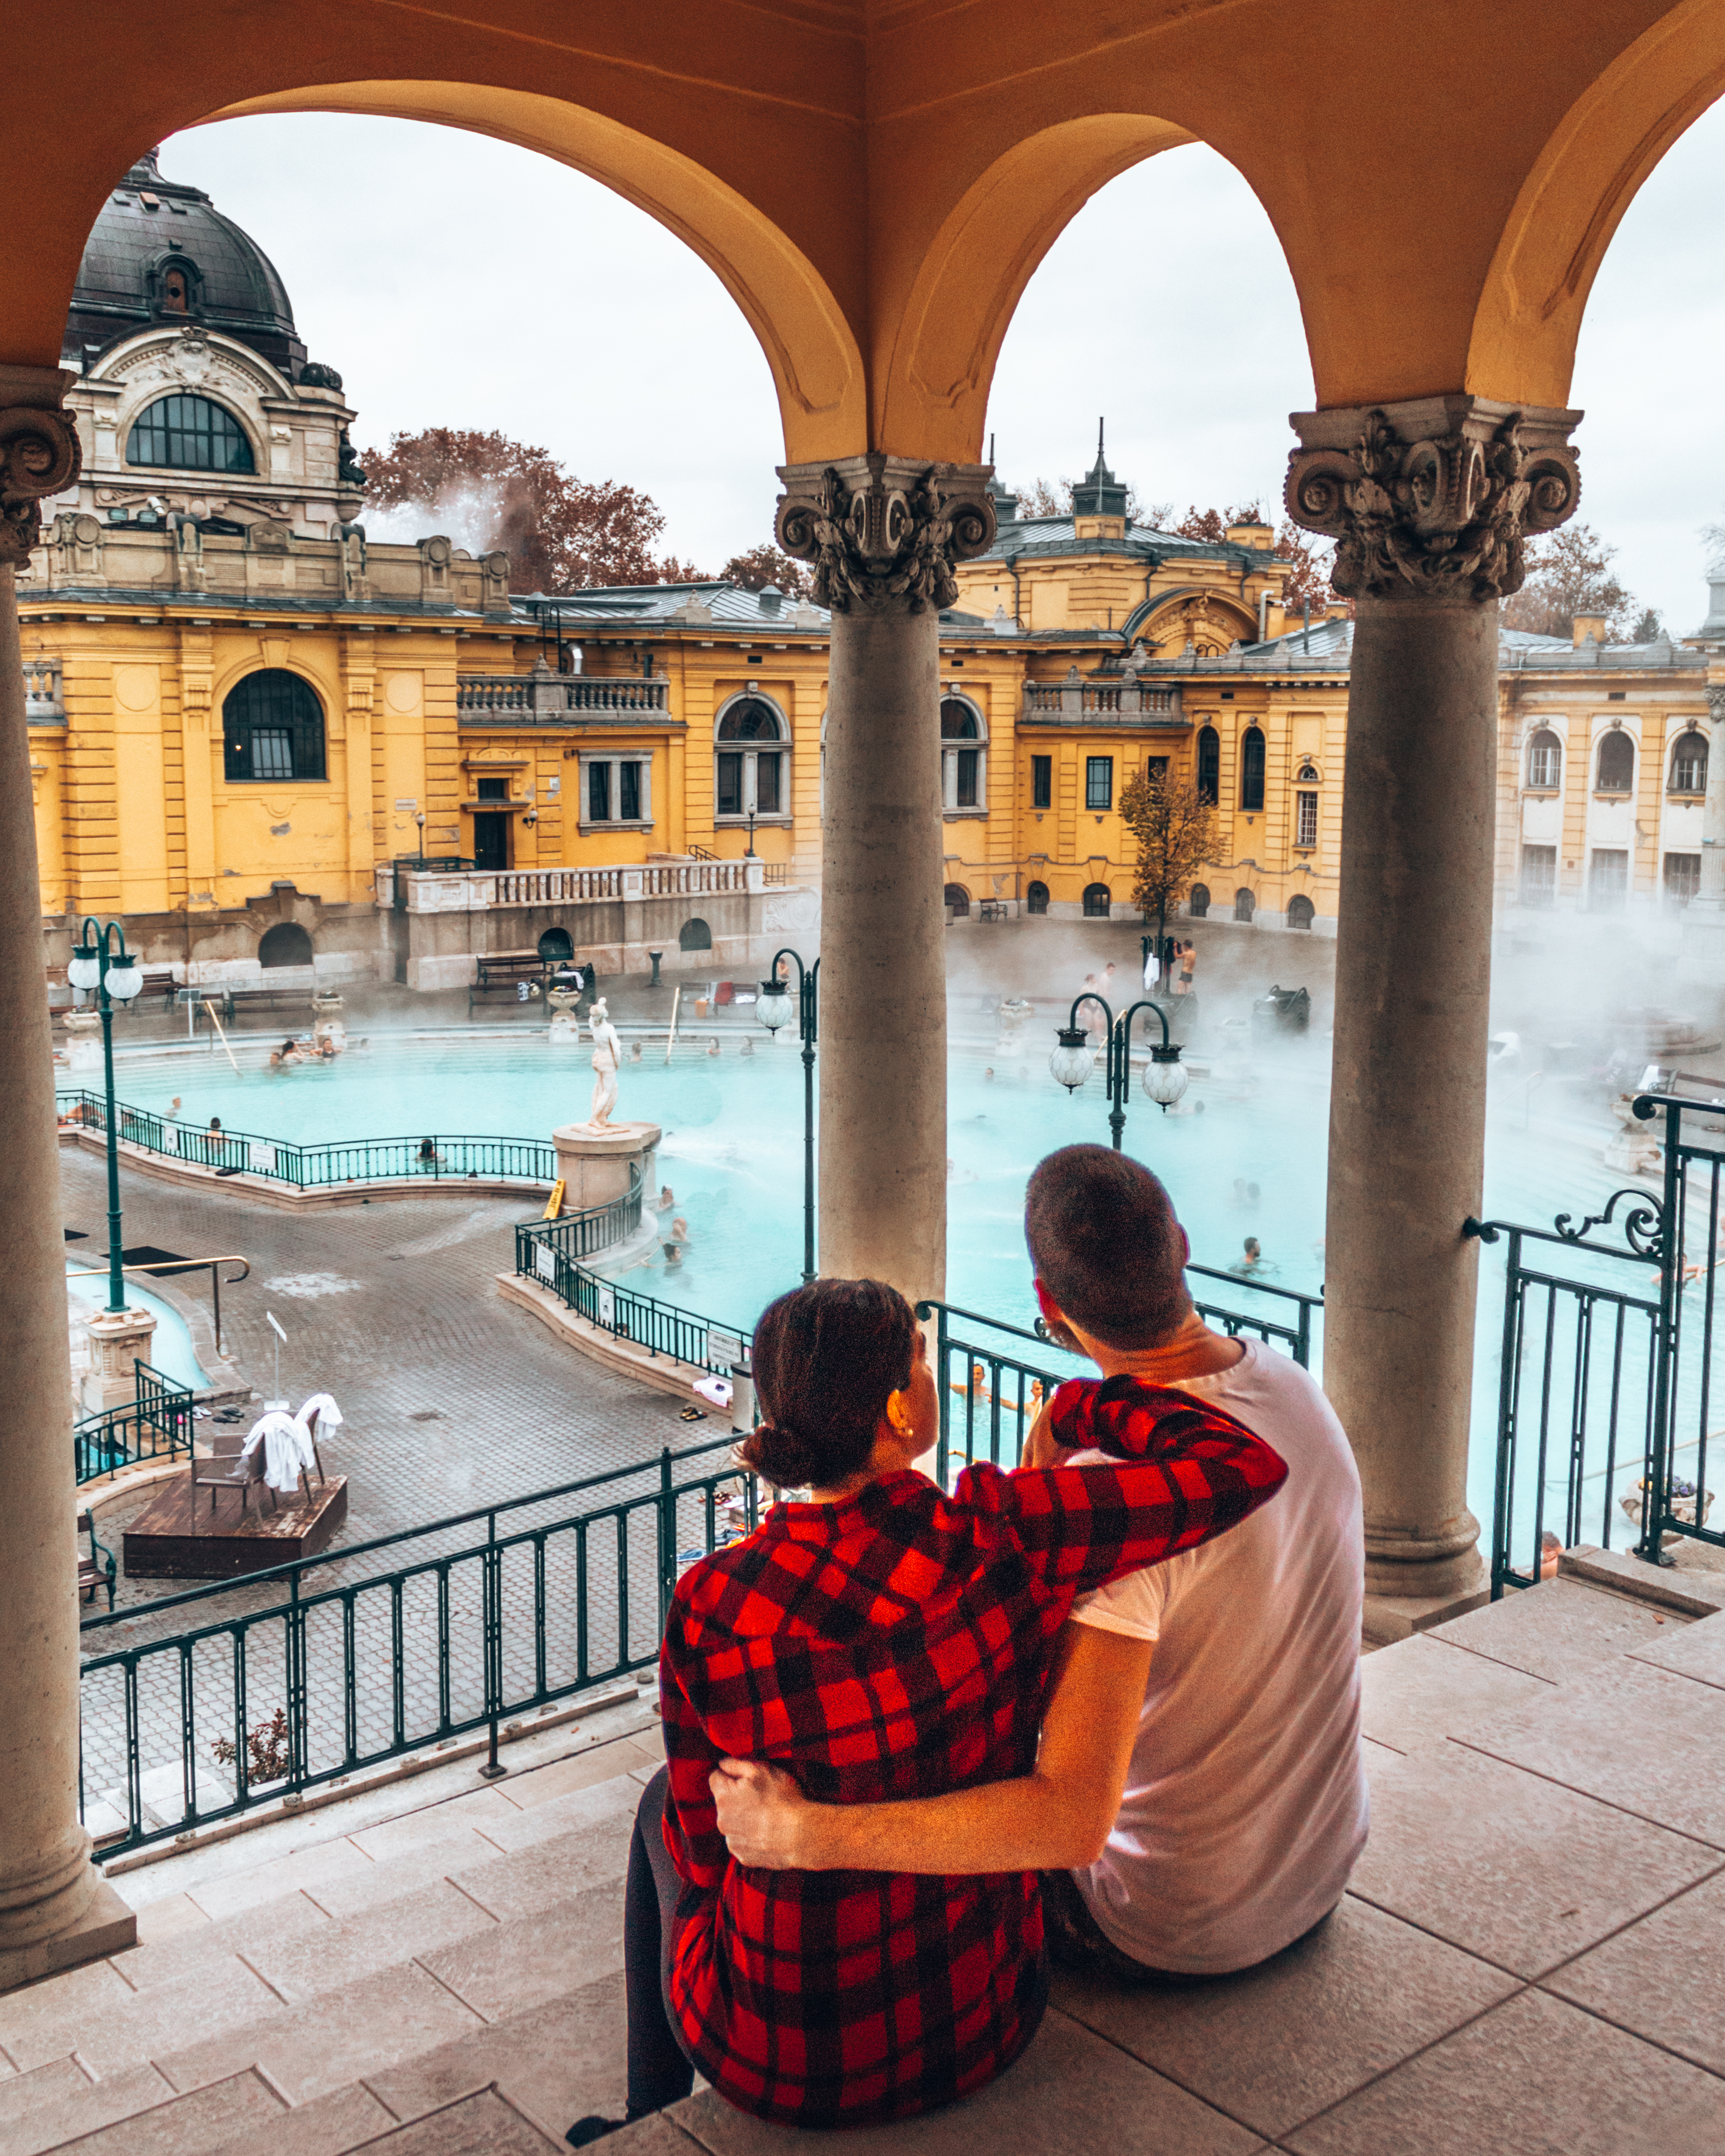 No visit to Budapest is complete without hitting up the baths